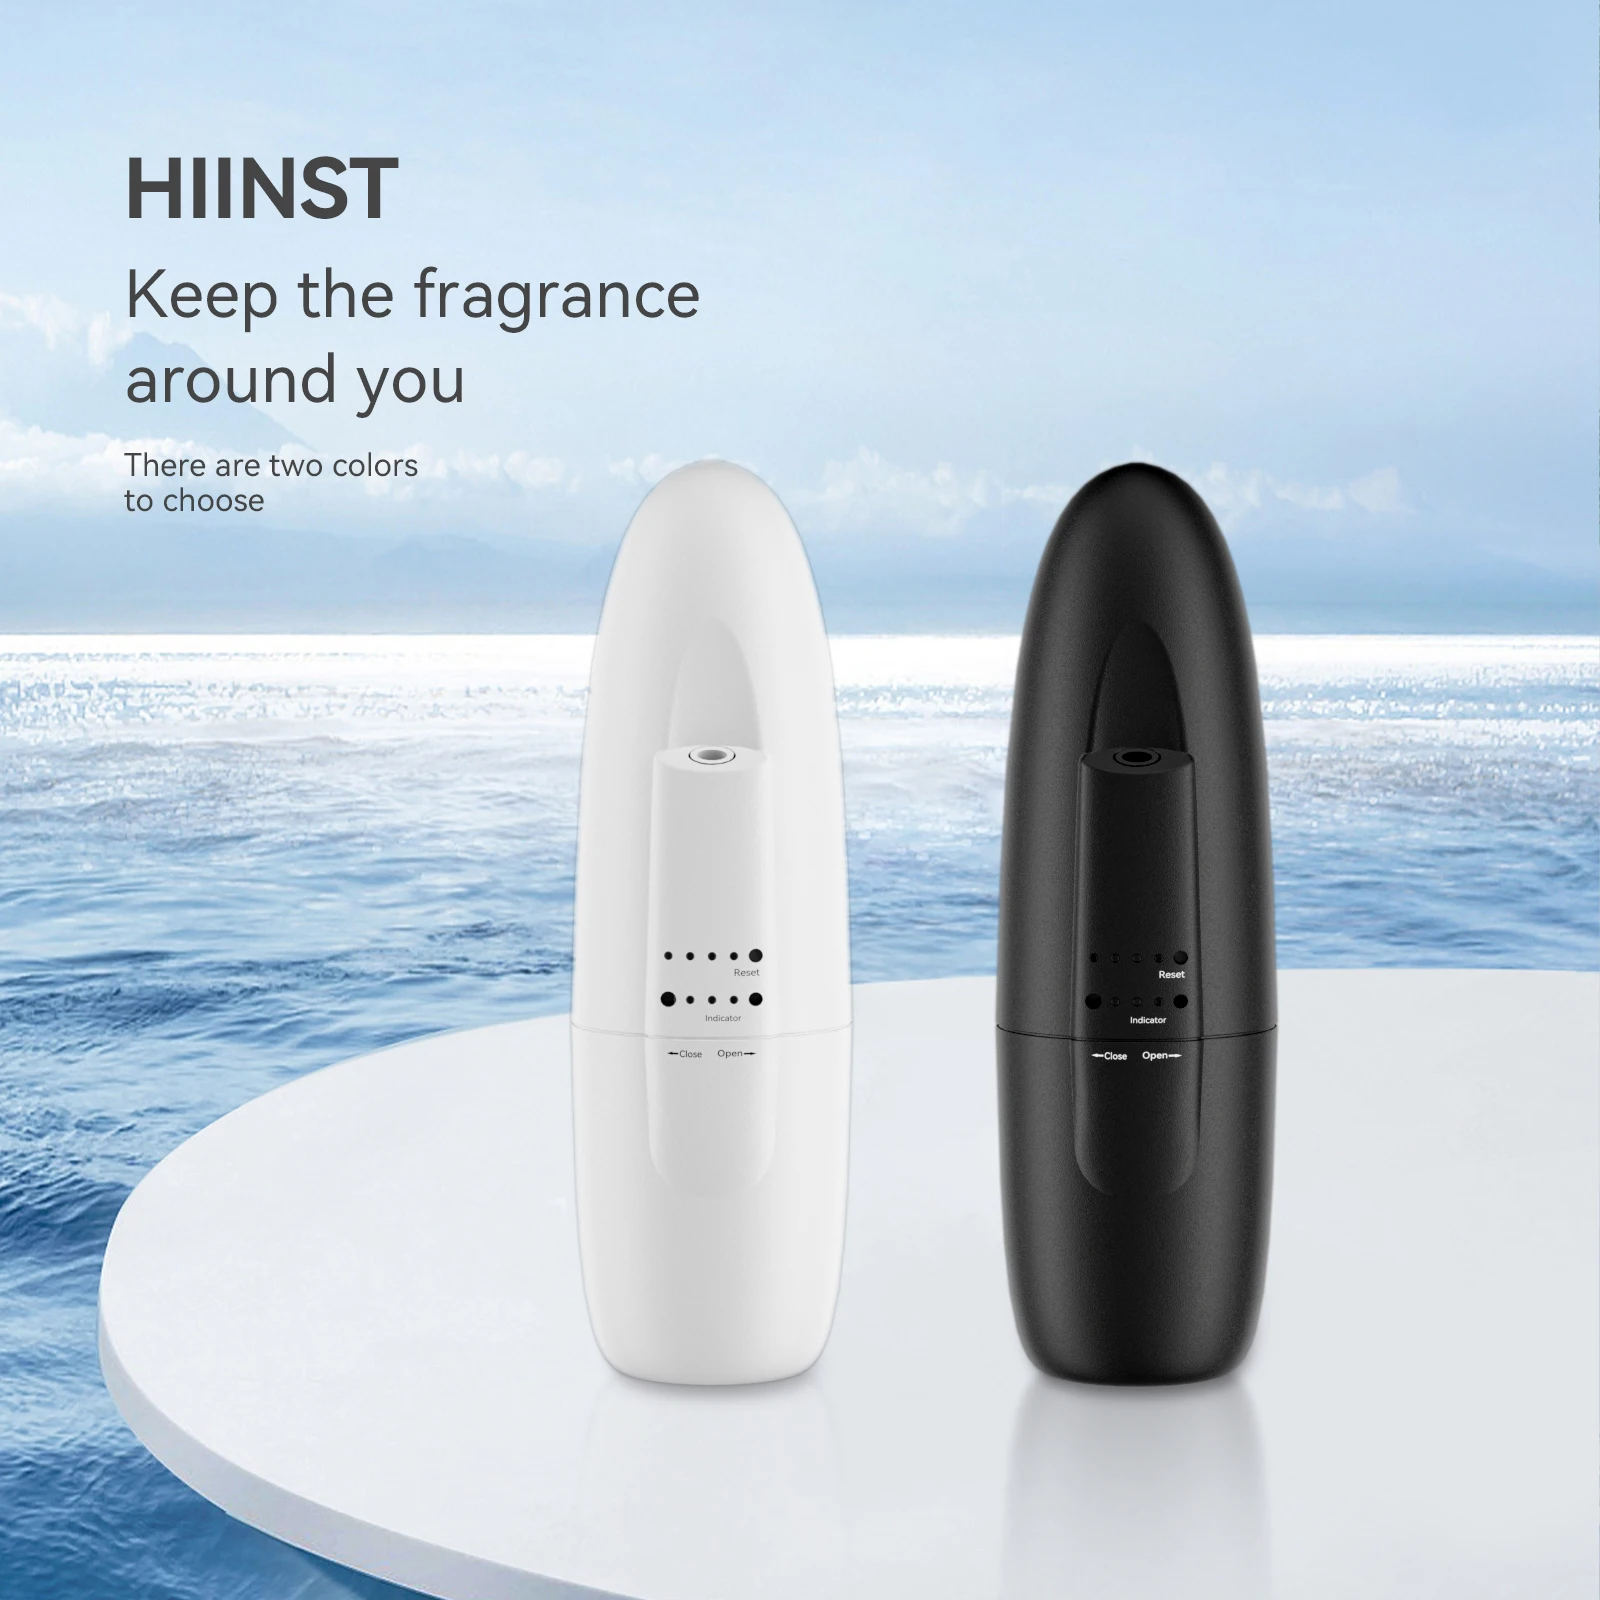 HIINST Smart Waterless Essential Oil Diffuser  Scent Machine Plug-in Wall Diffuser Aromatherapy Diffuser For Home